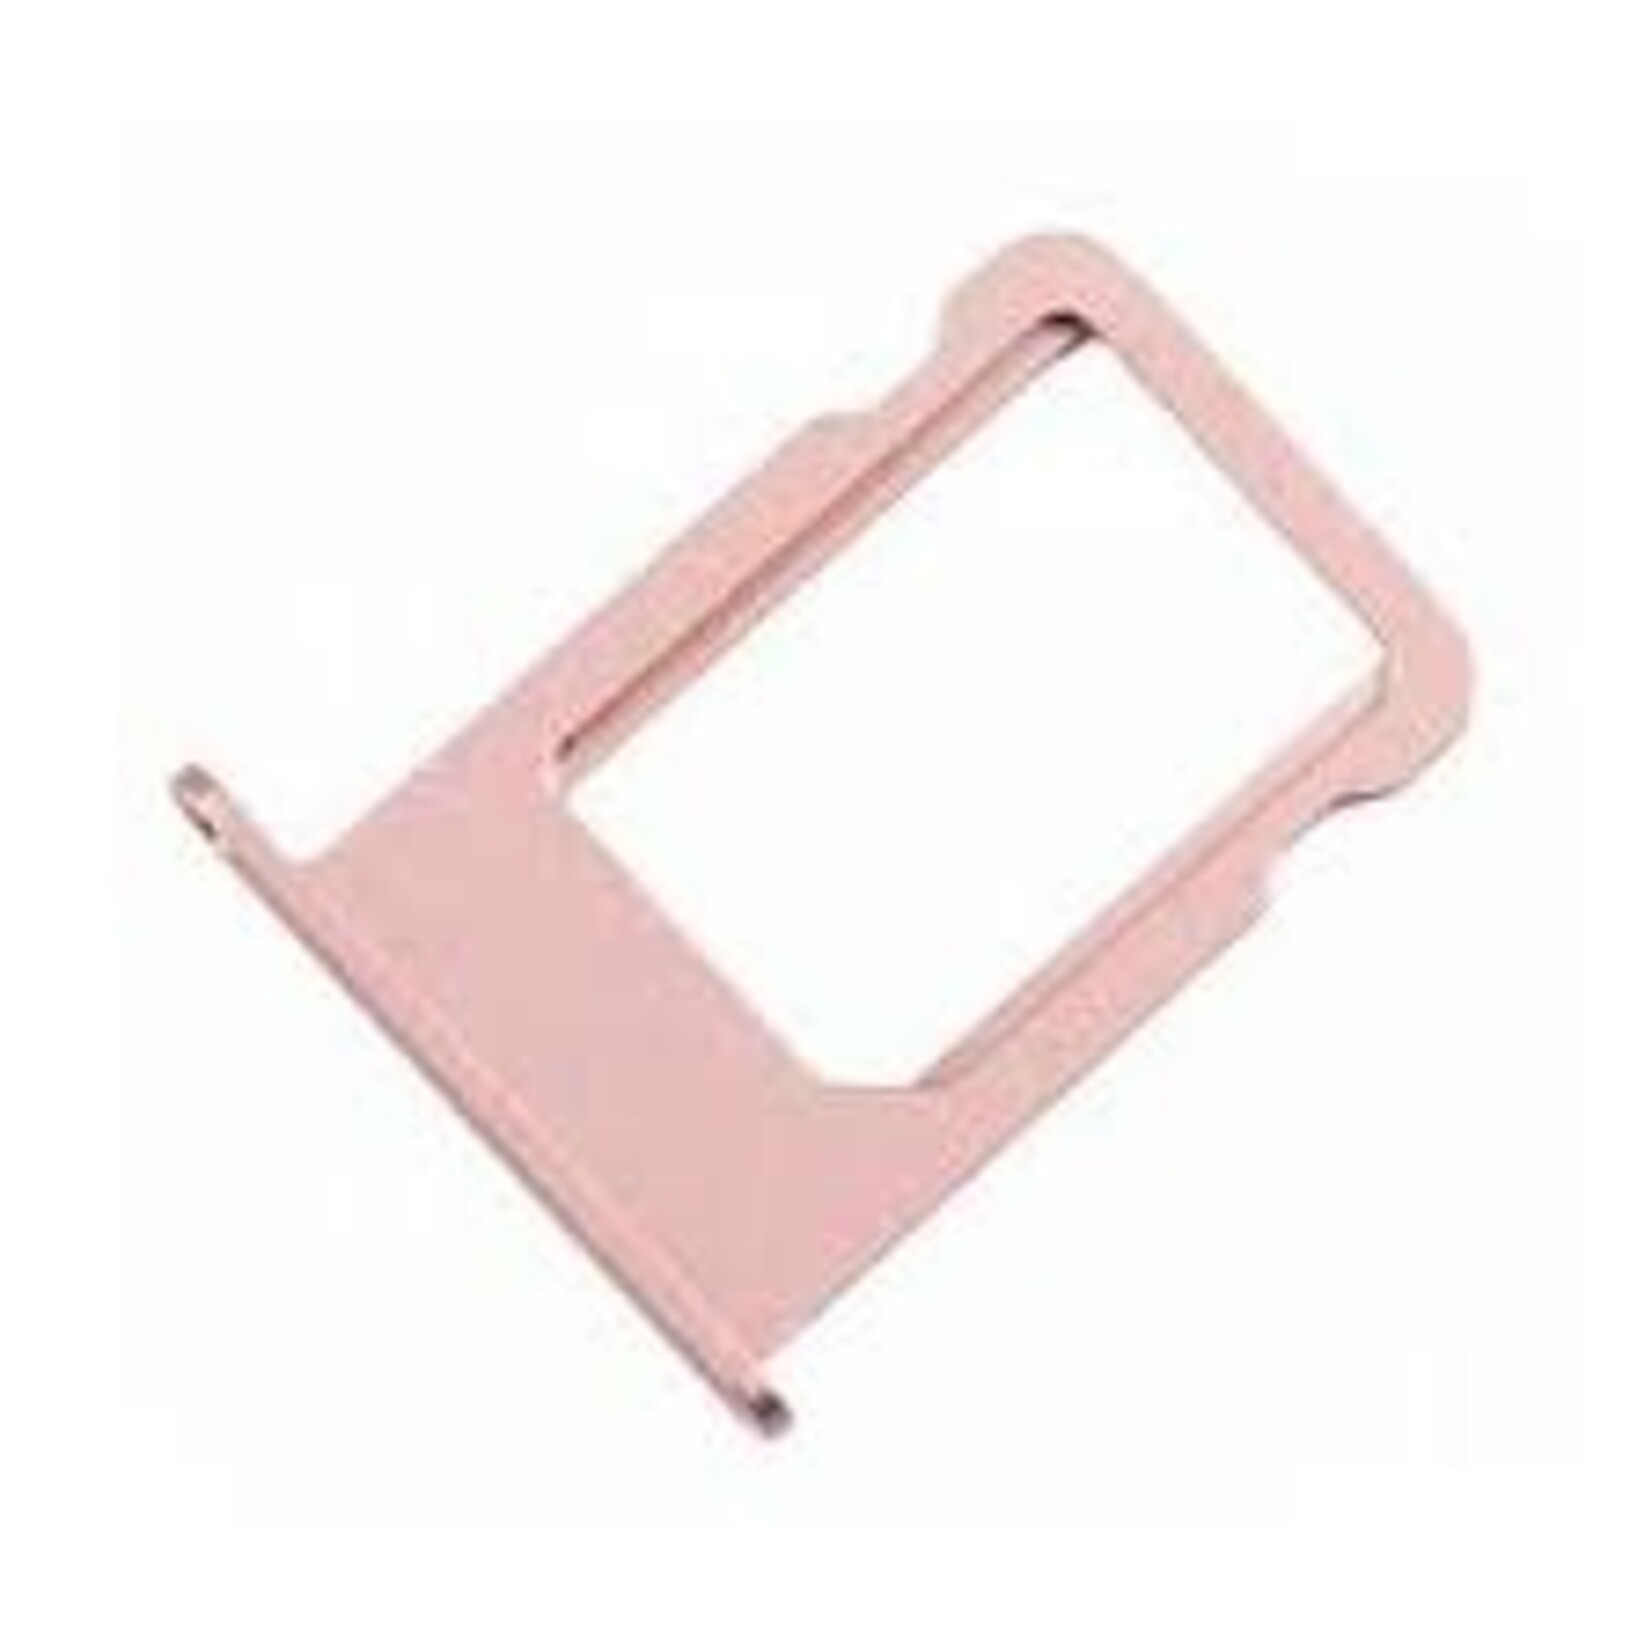 Apple SIM TRAY POUR IPHONE SE ROSE PINK